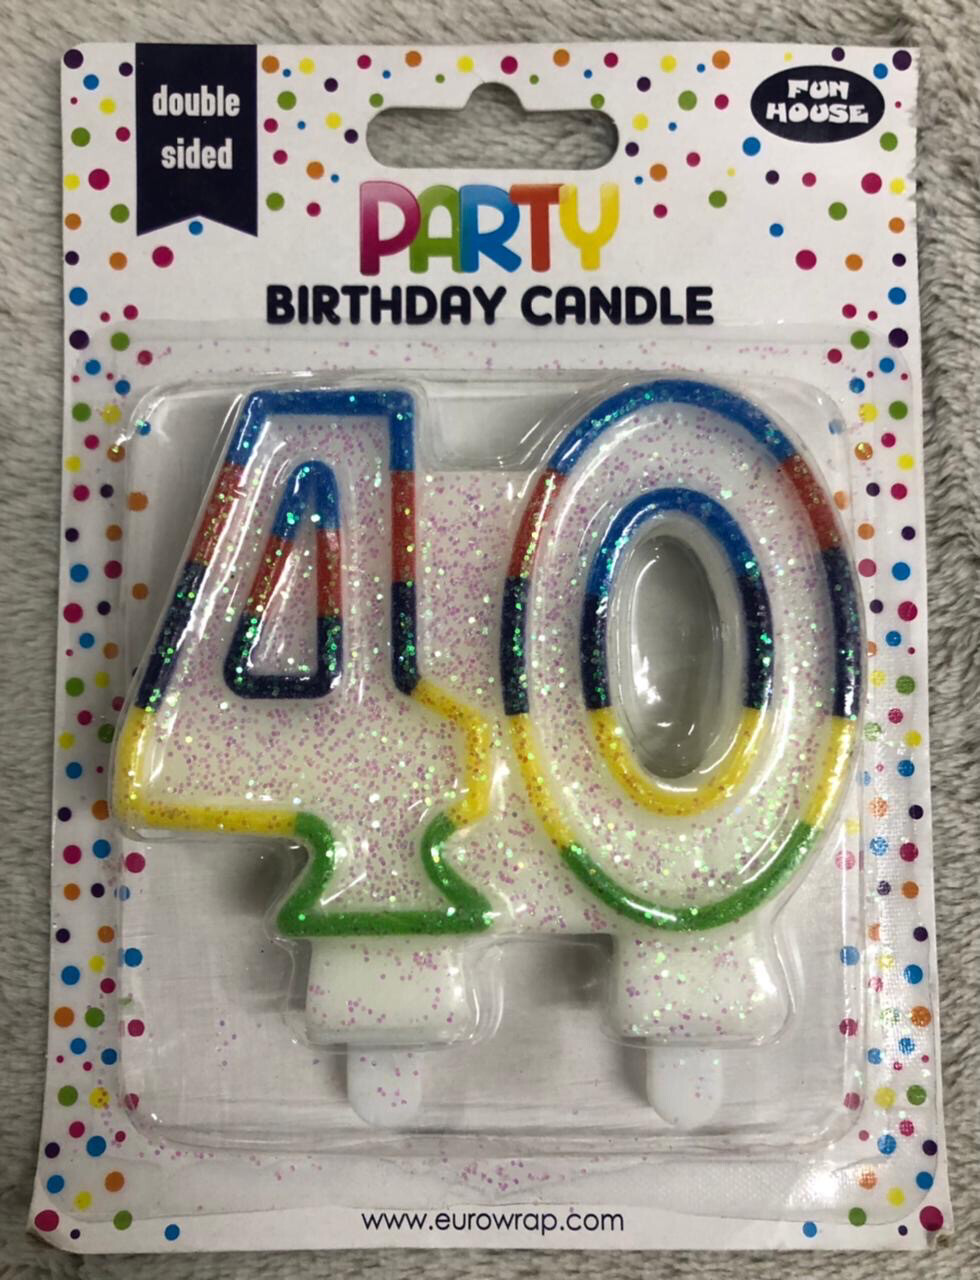 Fun House Party Birthday Candles Age 40 With Glitter. Double sided 6834-40-OBBC